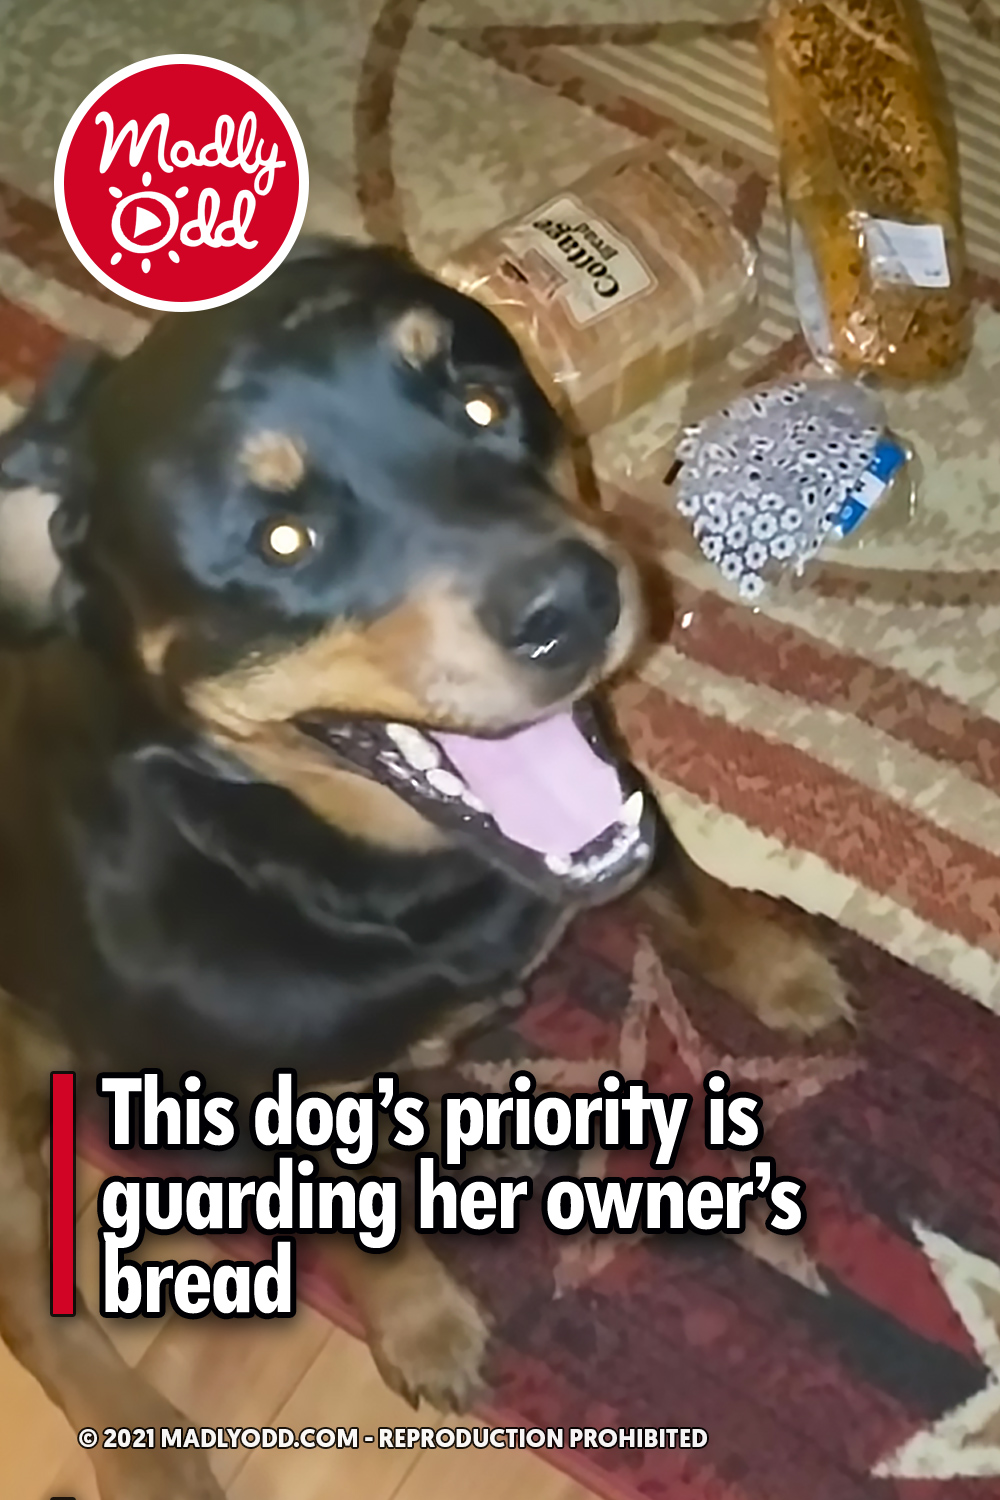 This dog’s priority is guarding her owner’s bread